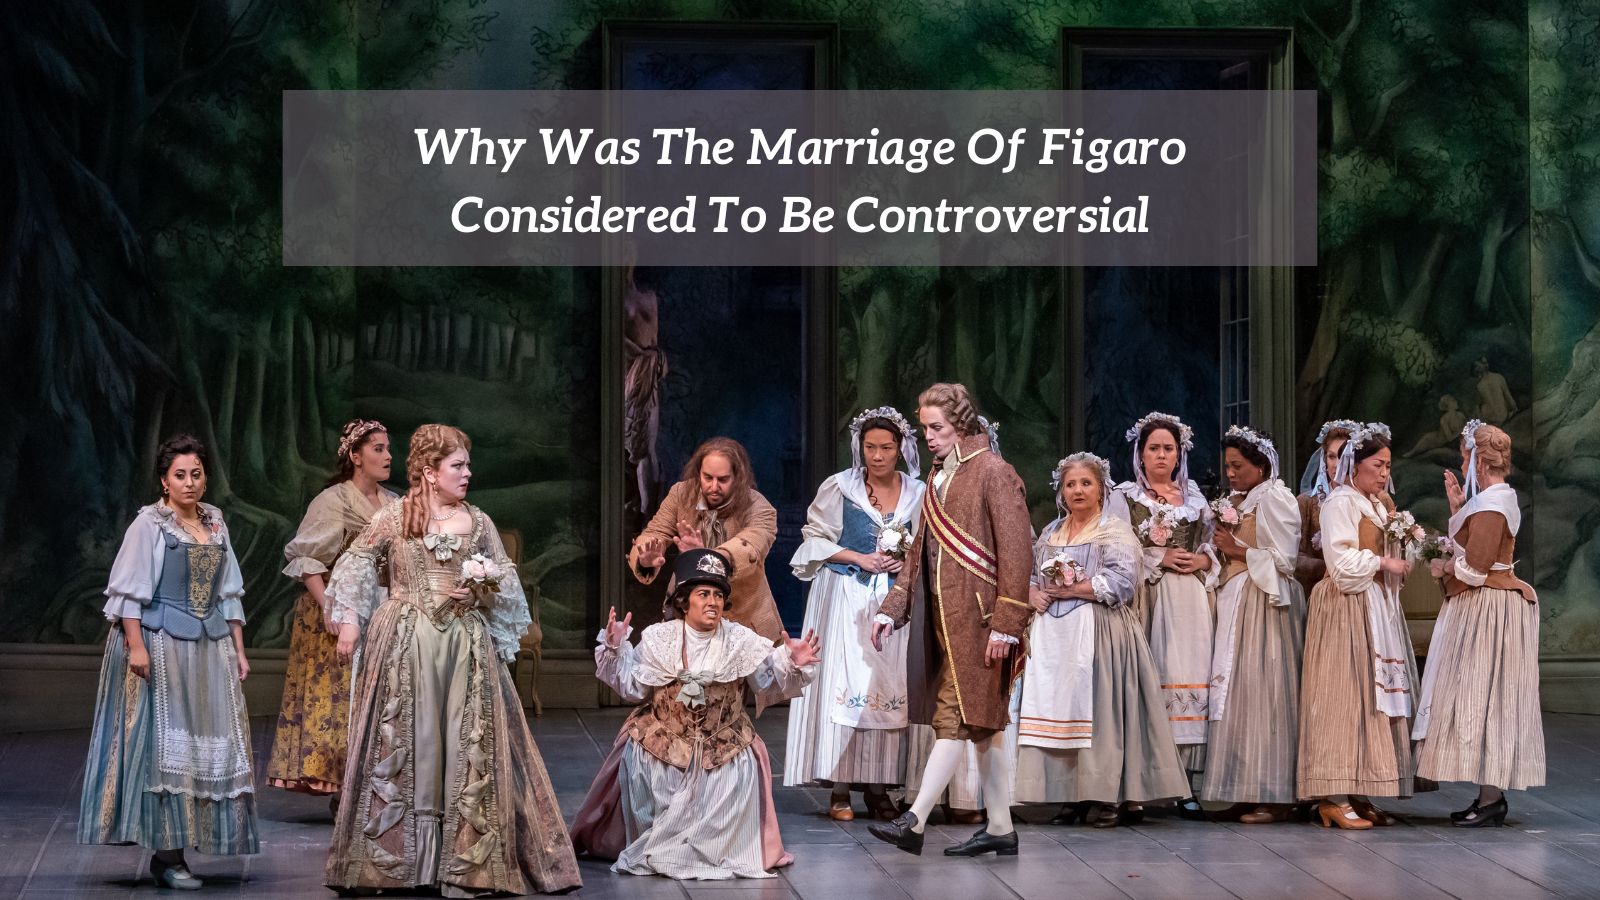 Why Was The Marriage Of Figaro Considered To Be Controversial